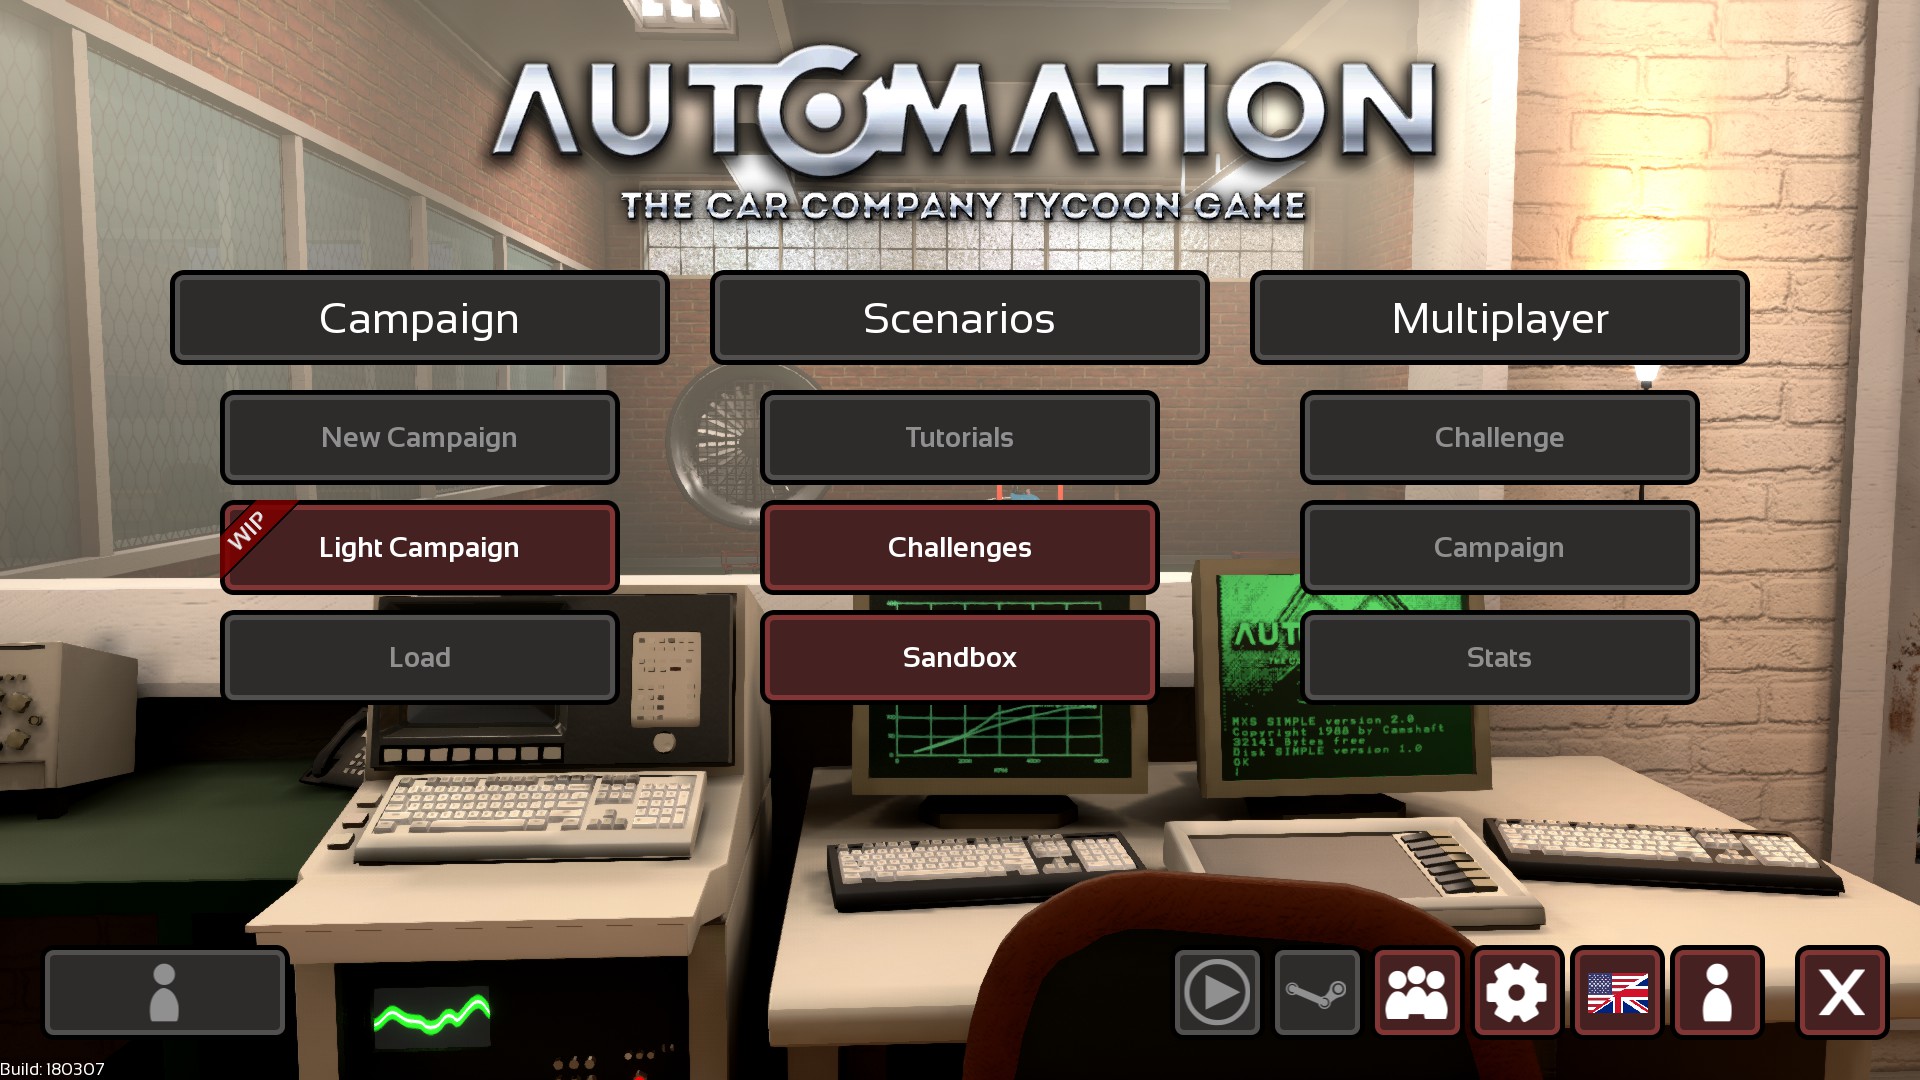 Automation - The Car Company Tycoon Game Images 